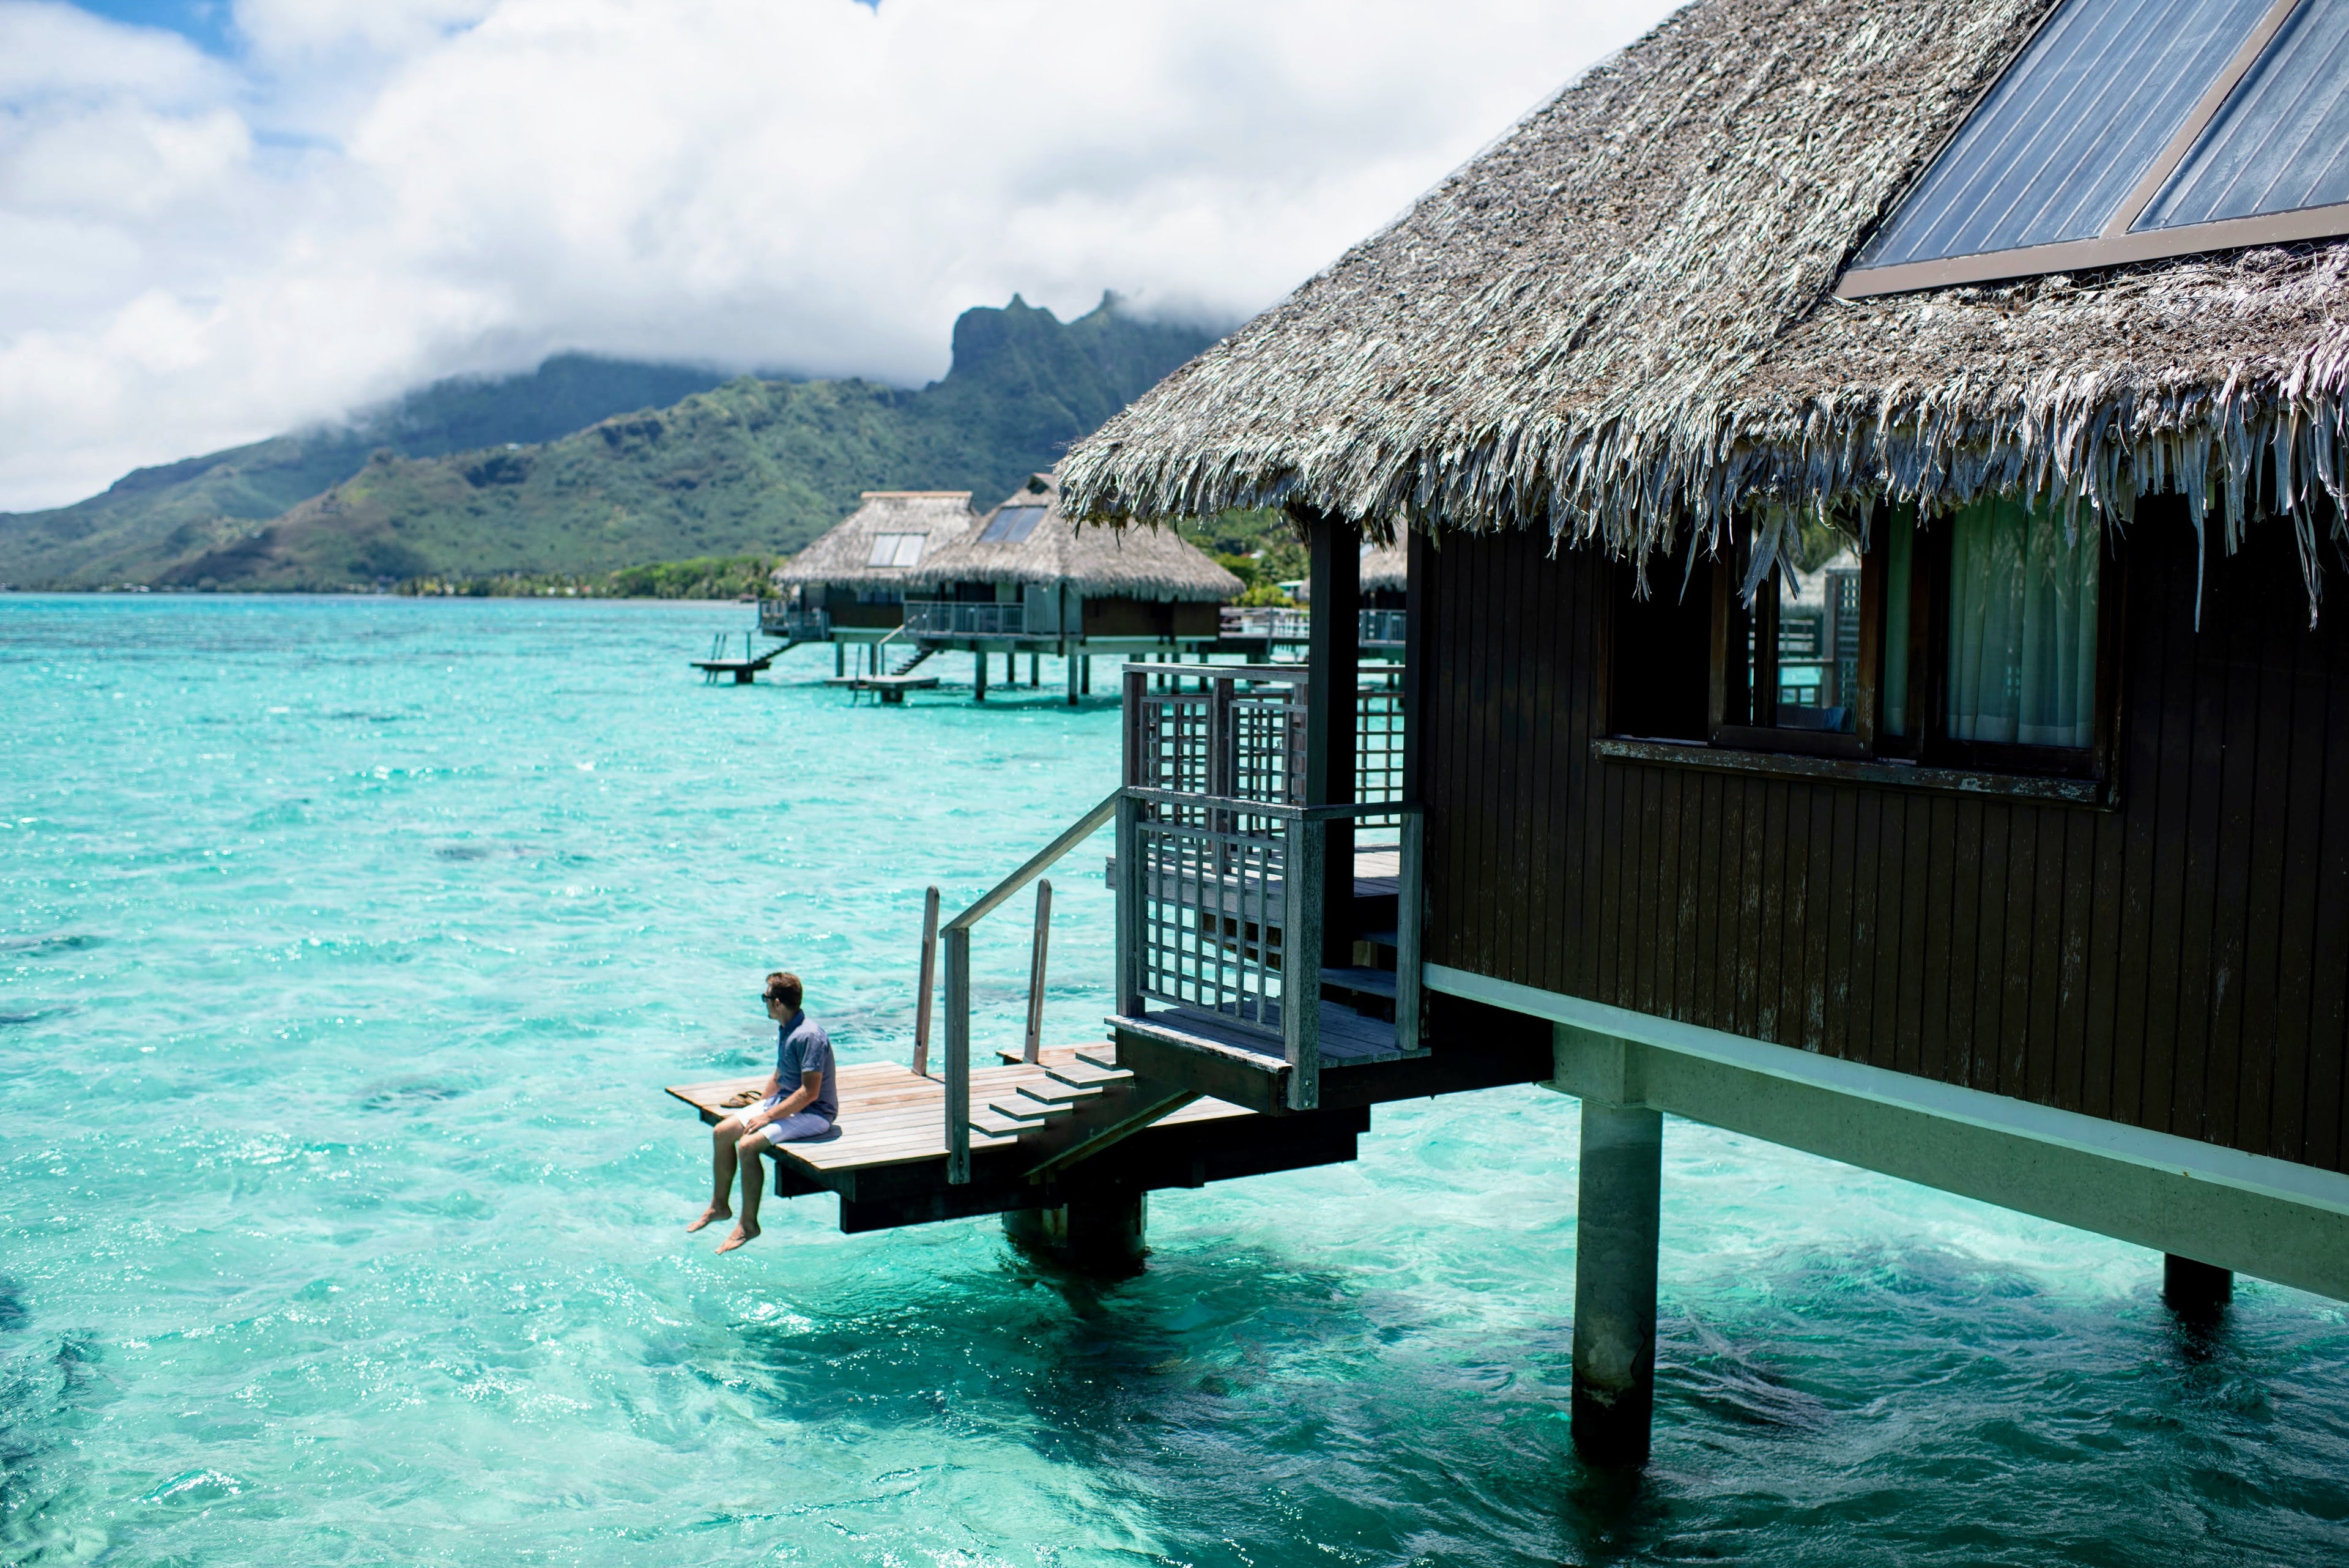 Hilton Moorea Lagoon Resort and Spa - sitting on overwater bungalow porch